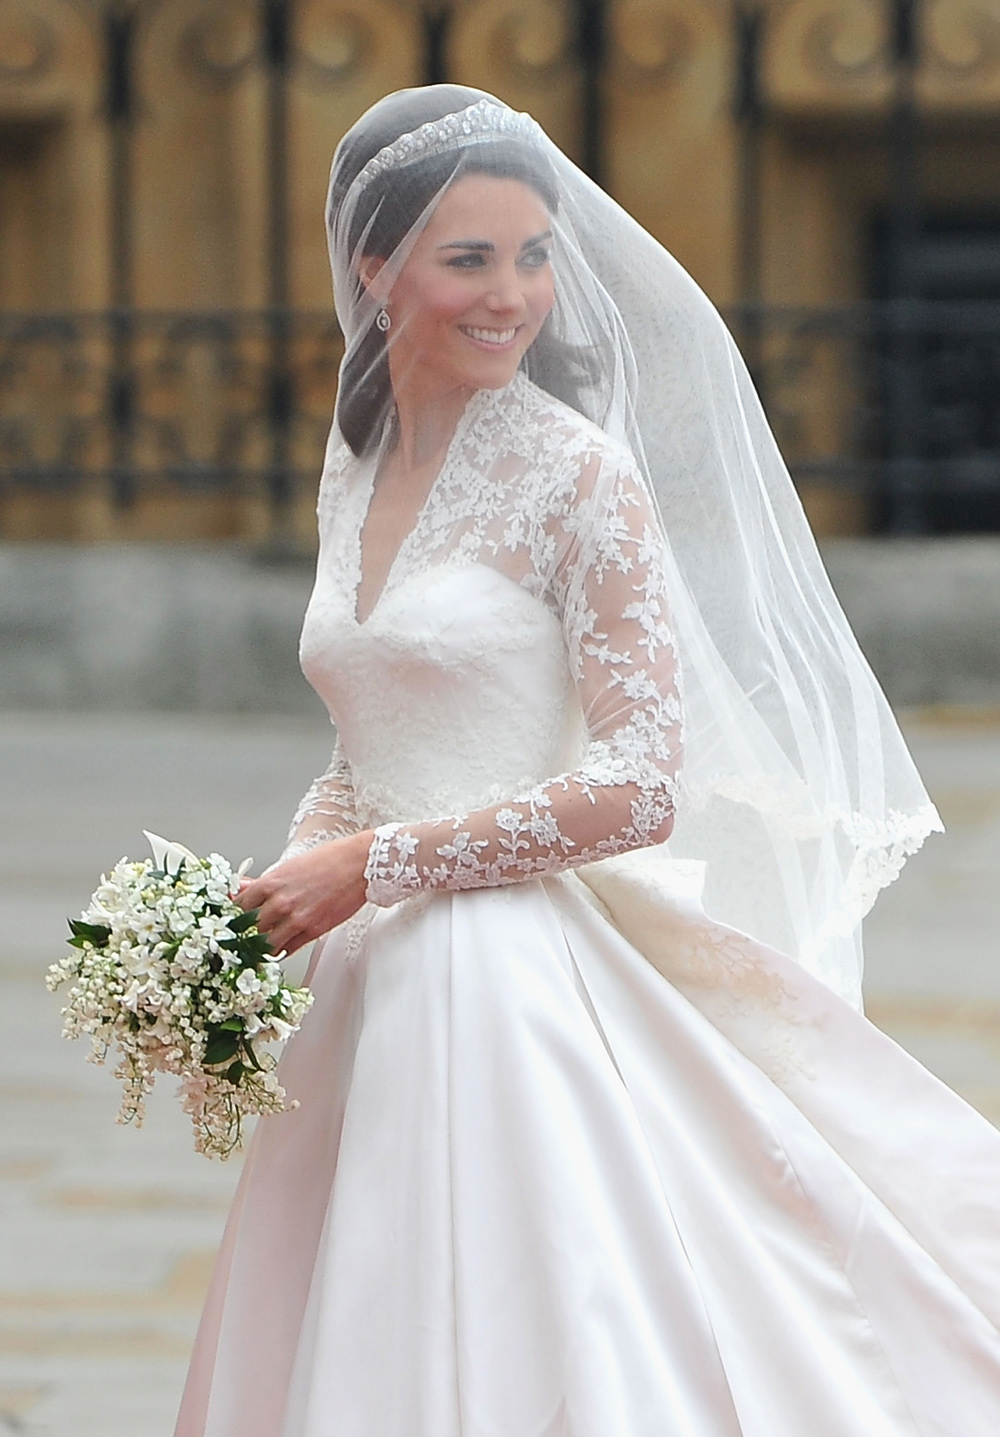 Catherine Middleton arrives to attend the Royal Wedding of Prince William to Catherine Middleton at Westminster Abbey